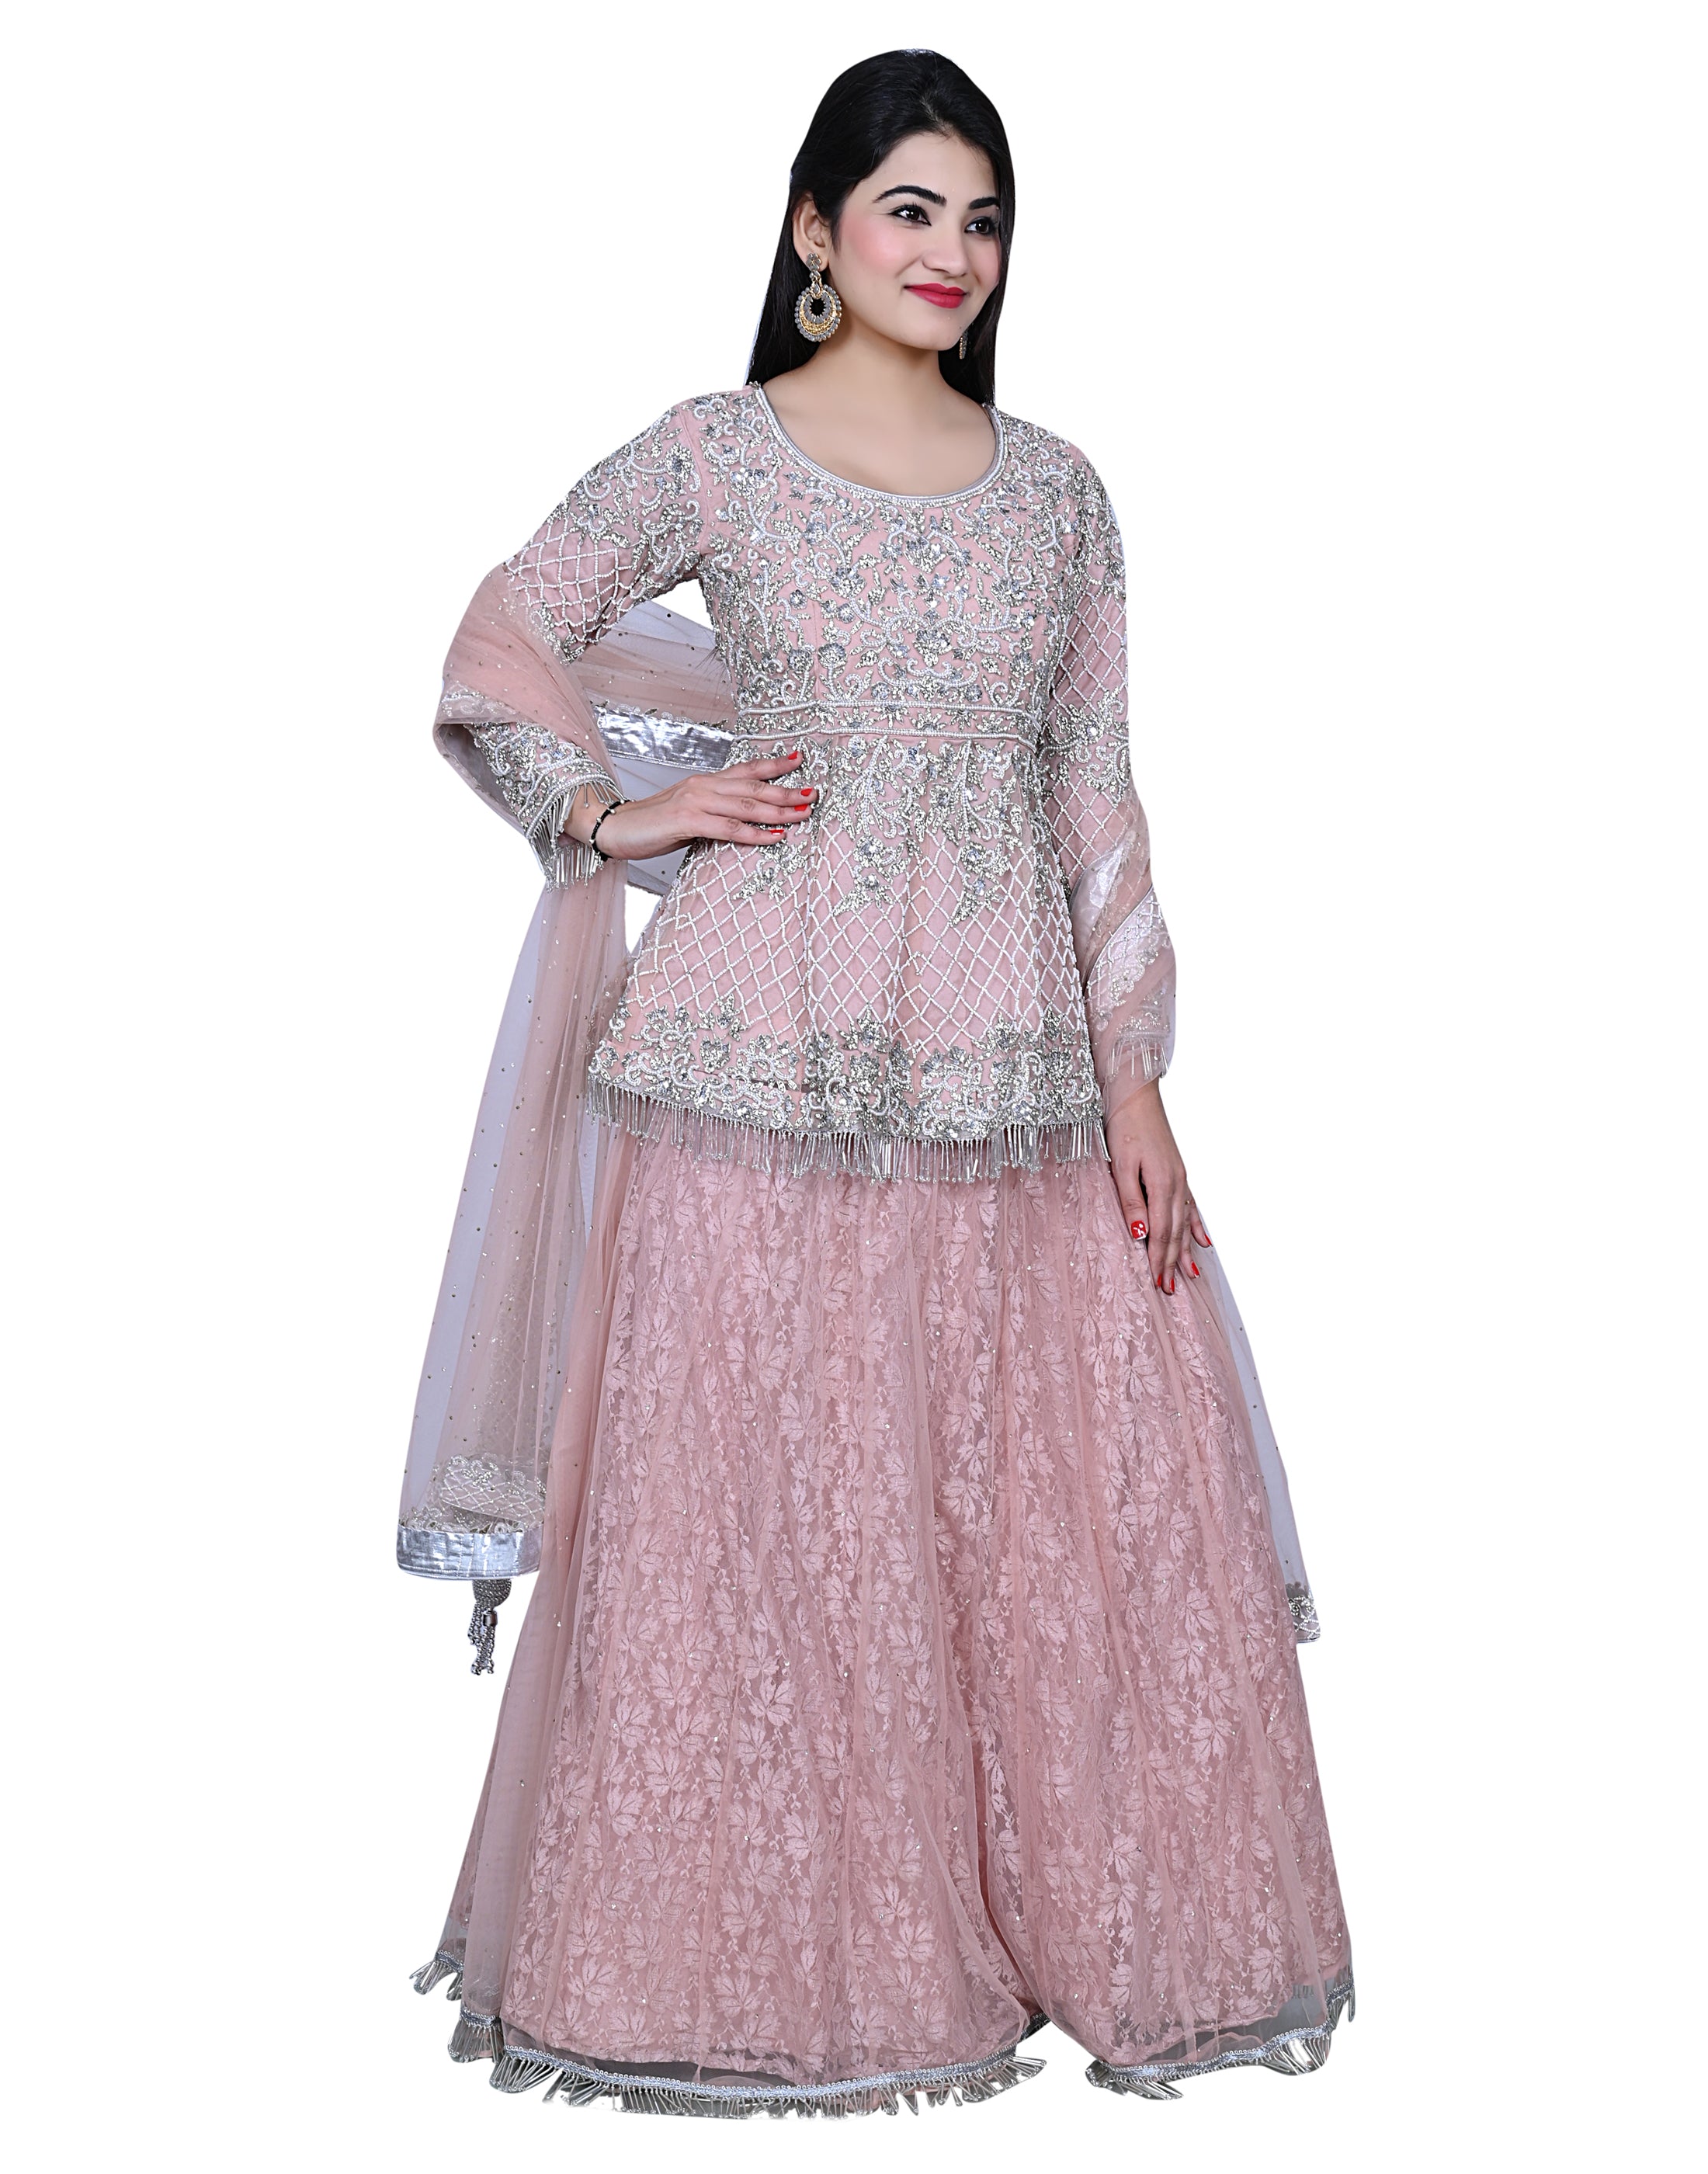 Dusty Pink Embroidered Party Wear Lengha With Peplum Shirt